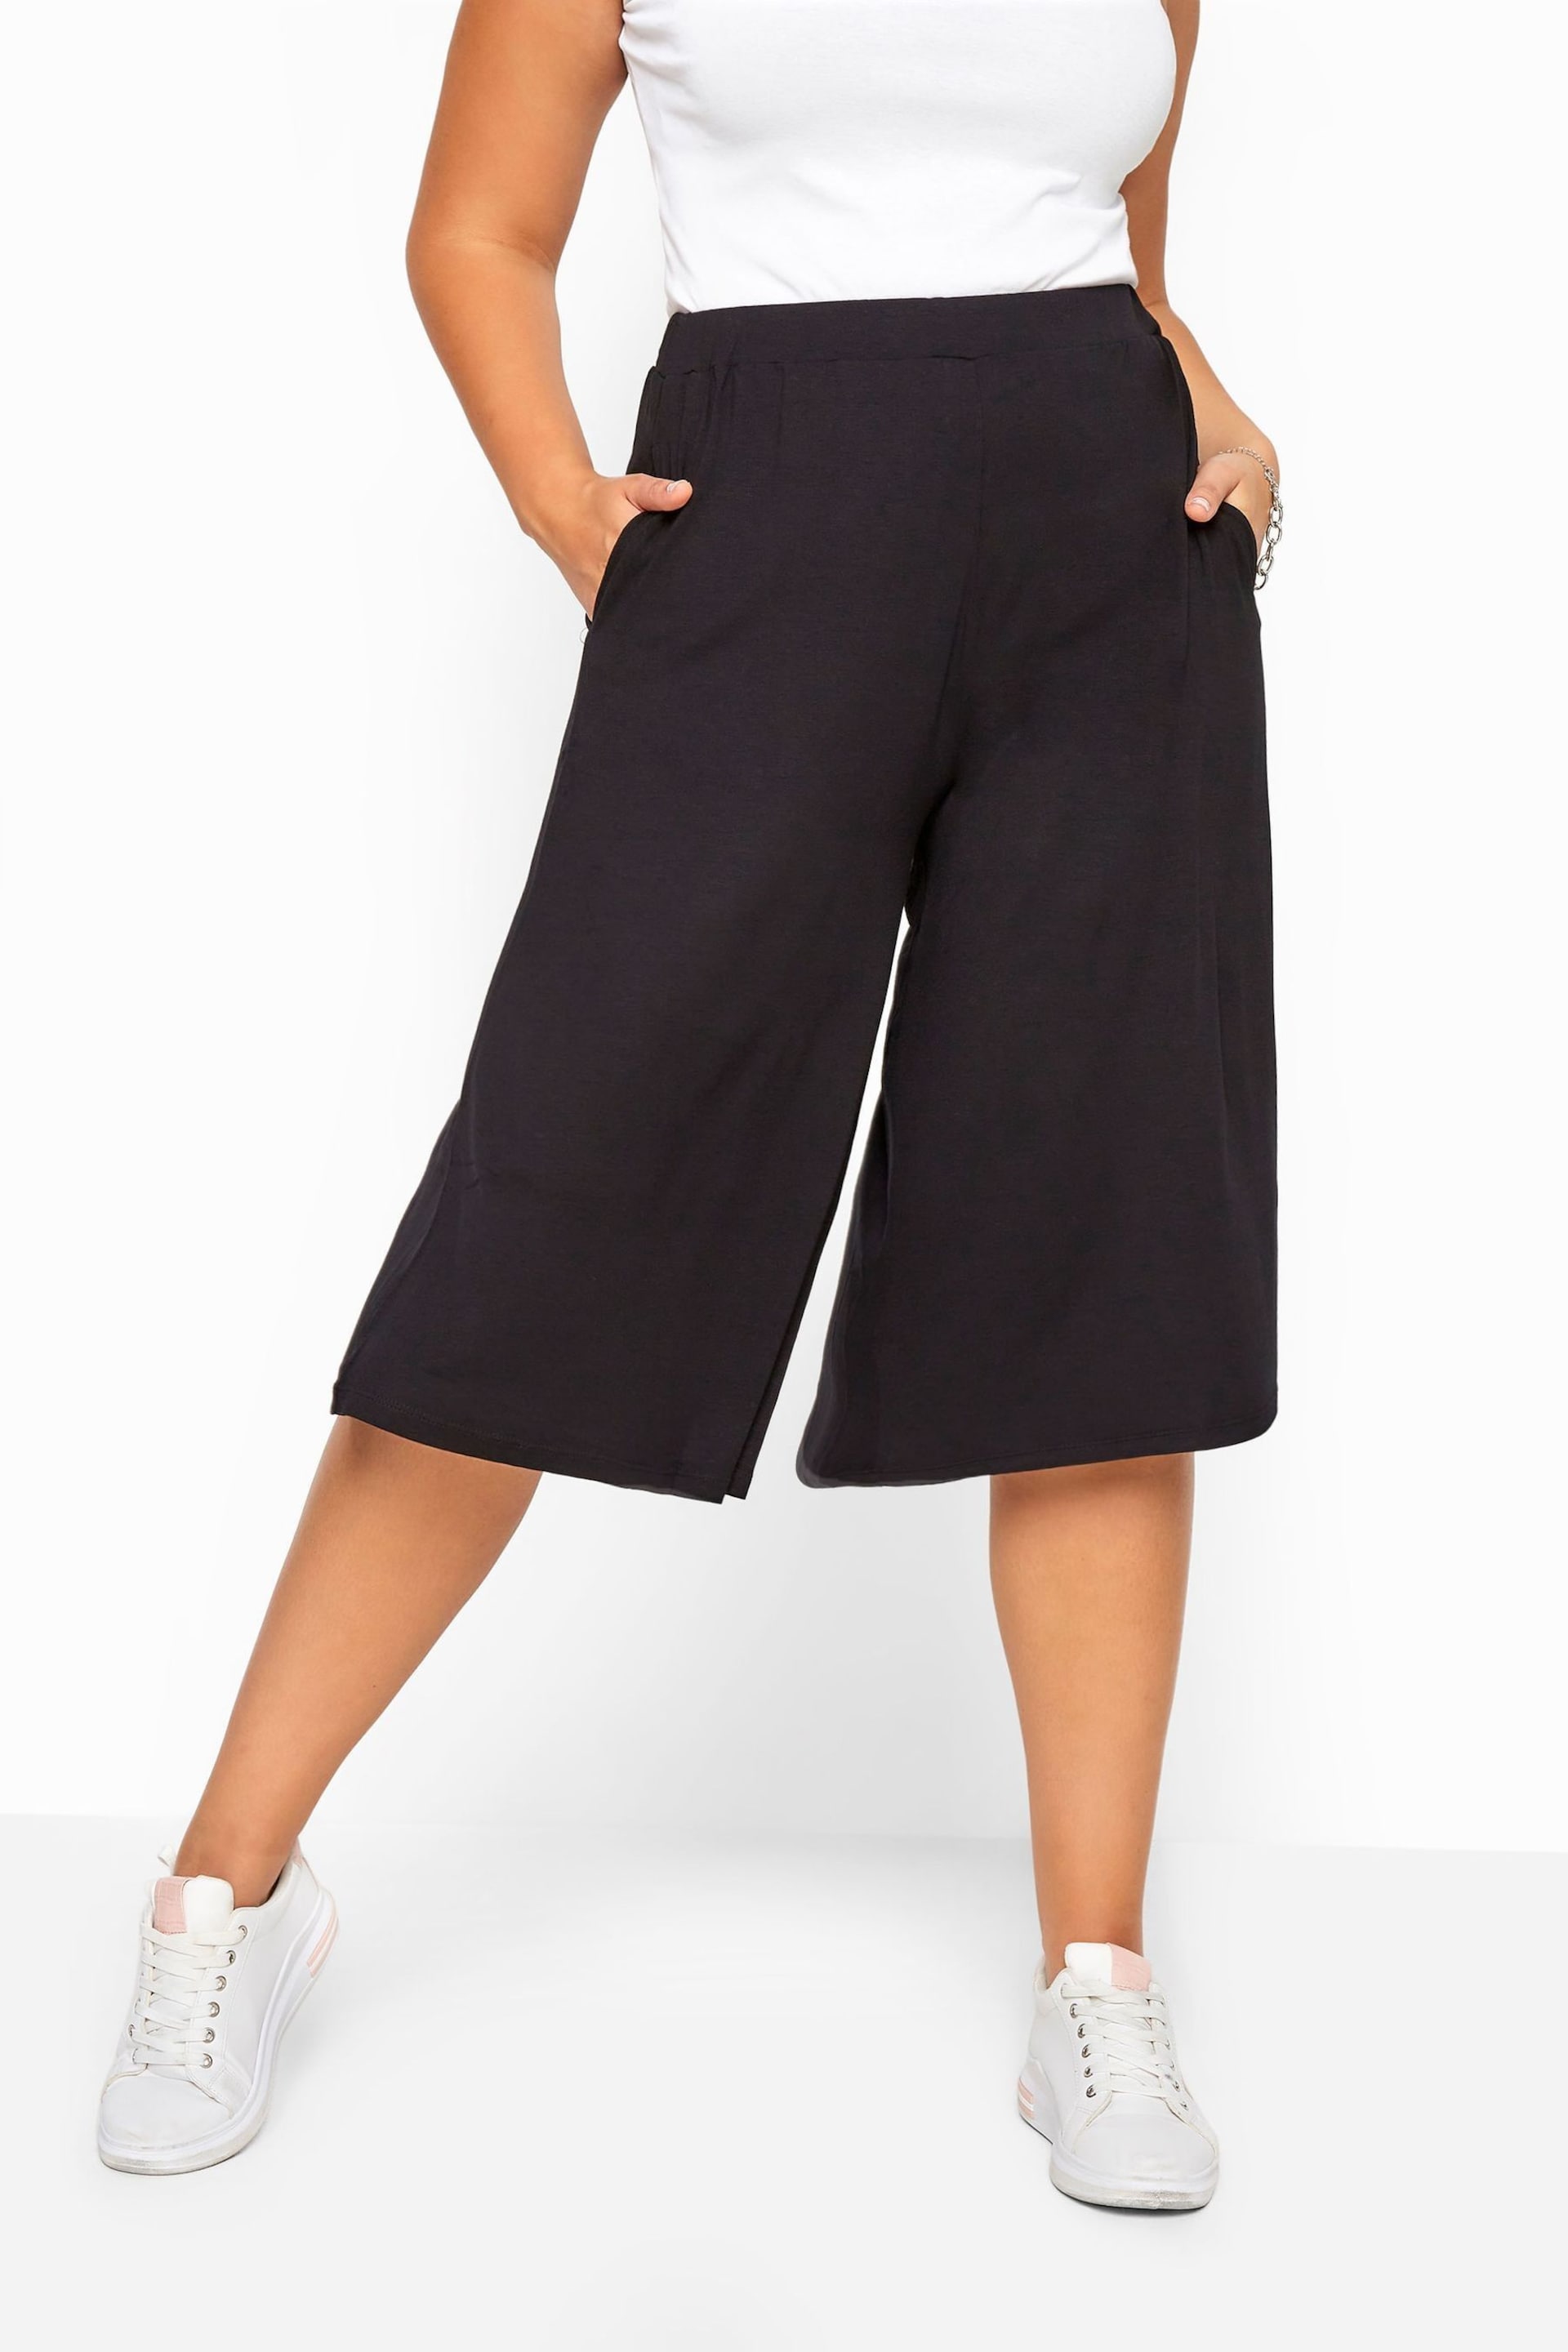 Yours Curve Black Jersey Culottes - Image 2 of 3